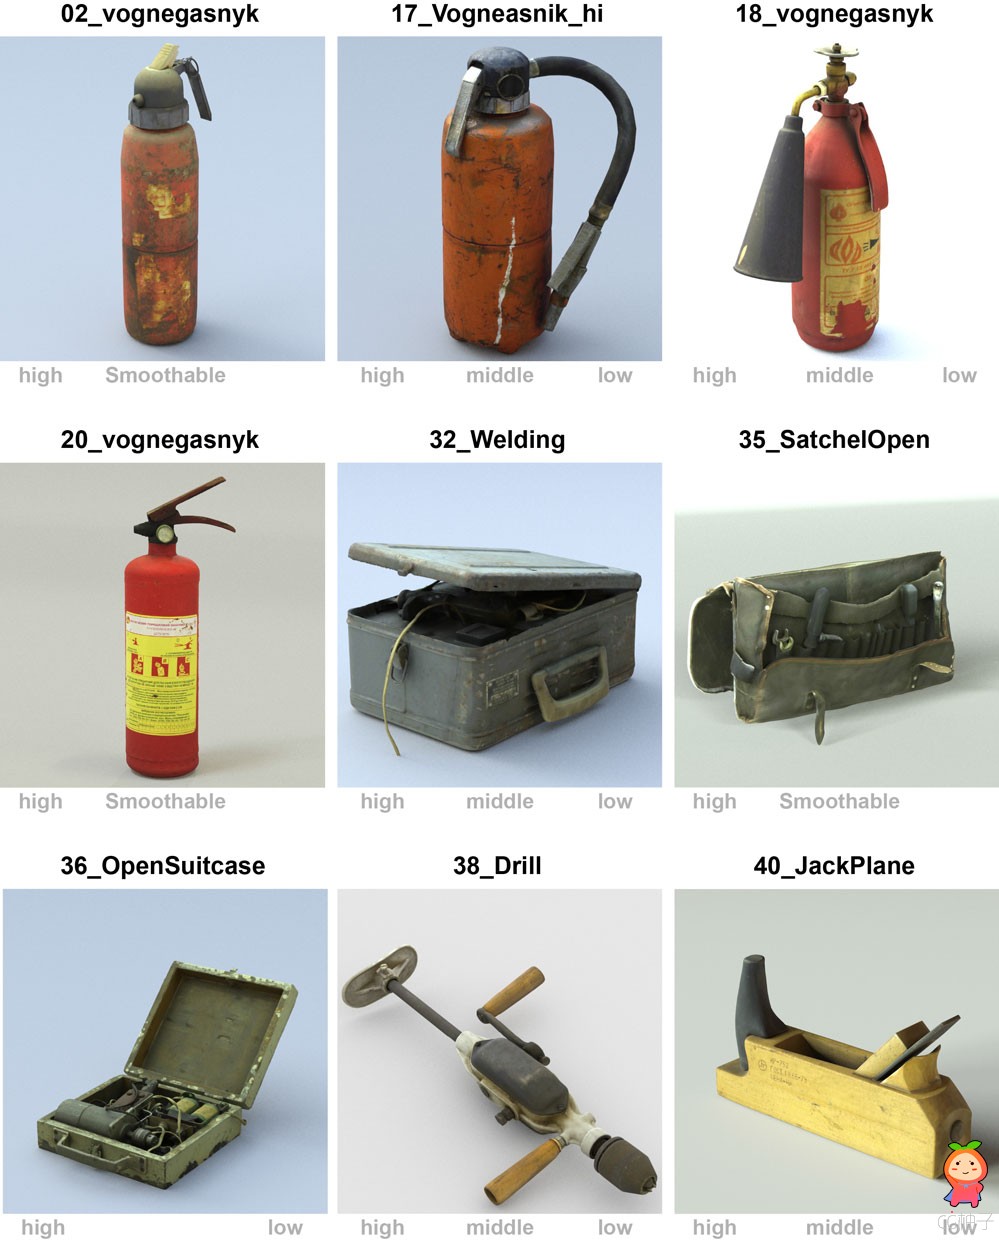 Guide-Collection-old-tools-PBR-1.jpg